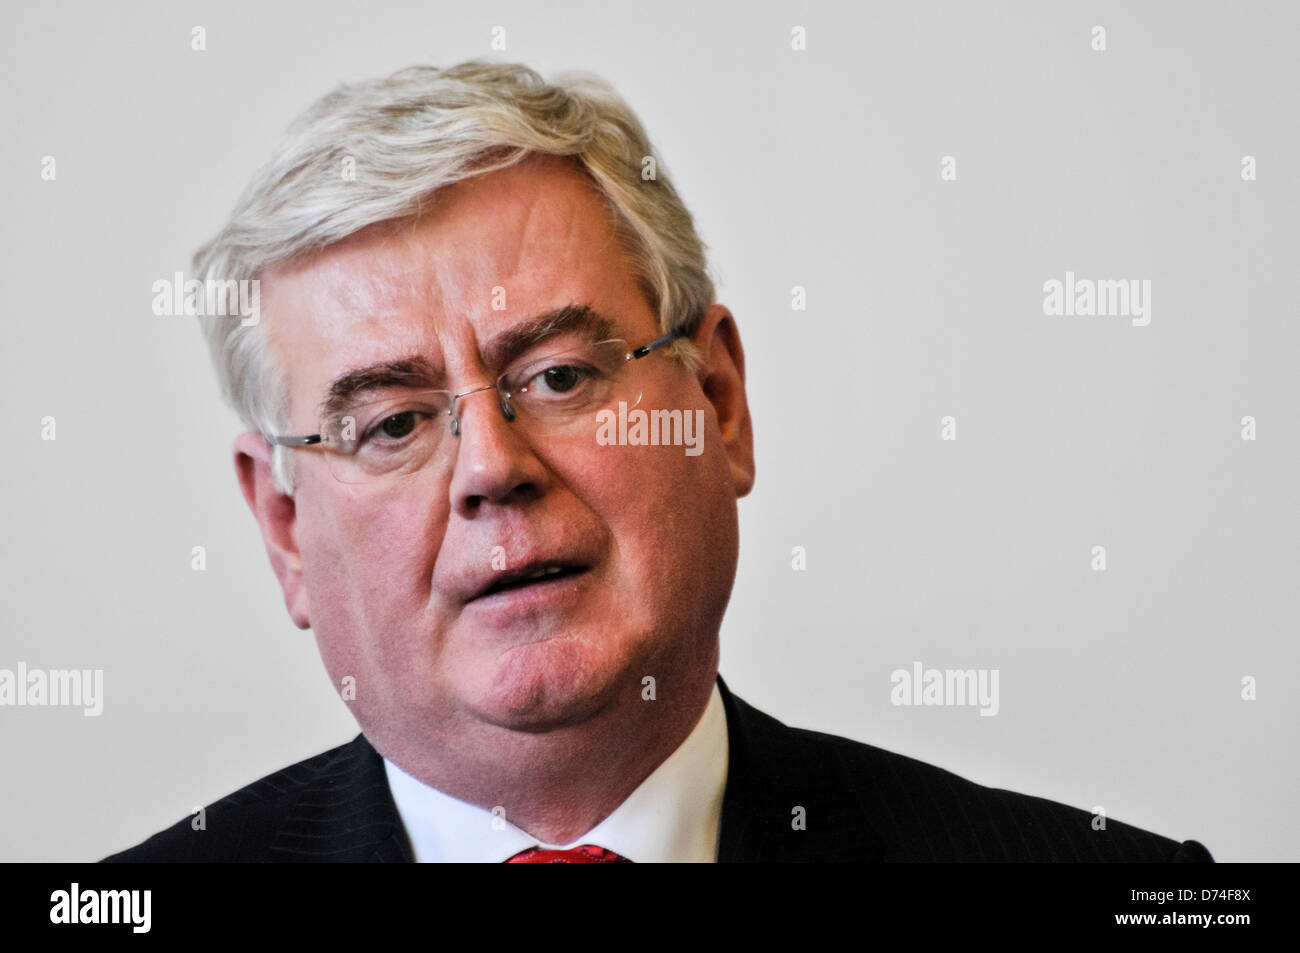 Belfast, Northern Ireland. 29th April 2013. Irish Tánaiste Eamon Gilmore addresses a number of 15 year old students to mark the 15th anniversary of the Good Friday Agreement. Credit: Stephen Barnes/Alamy Live News Stock Photo